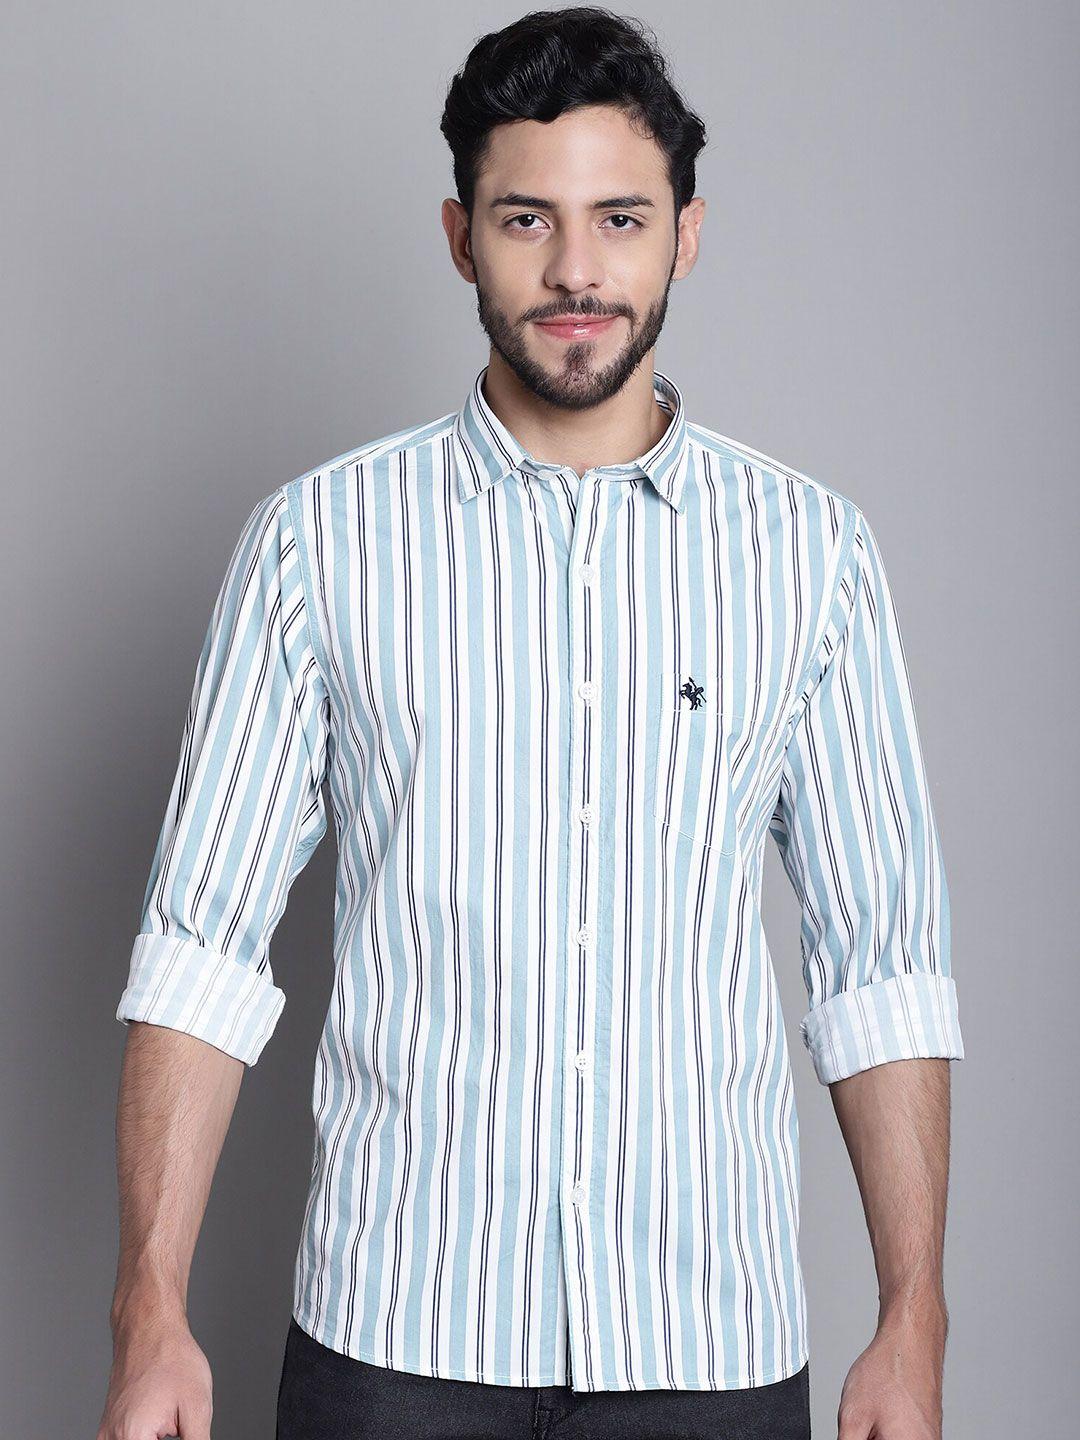 cantabil-striped-comfort-regular-fit-cotton-casual-shirt